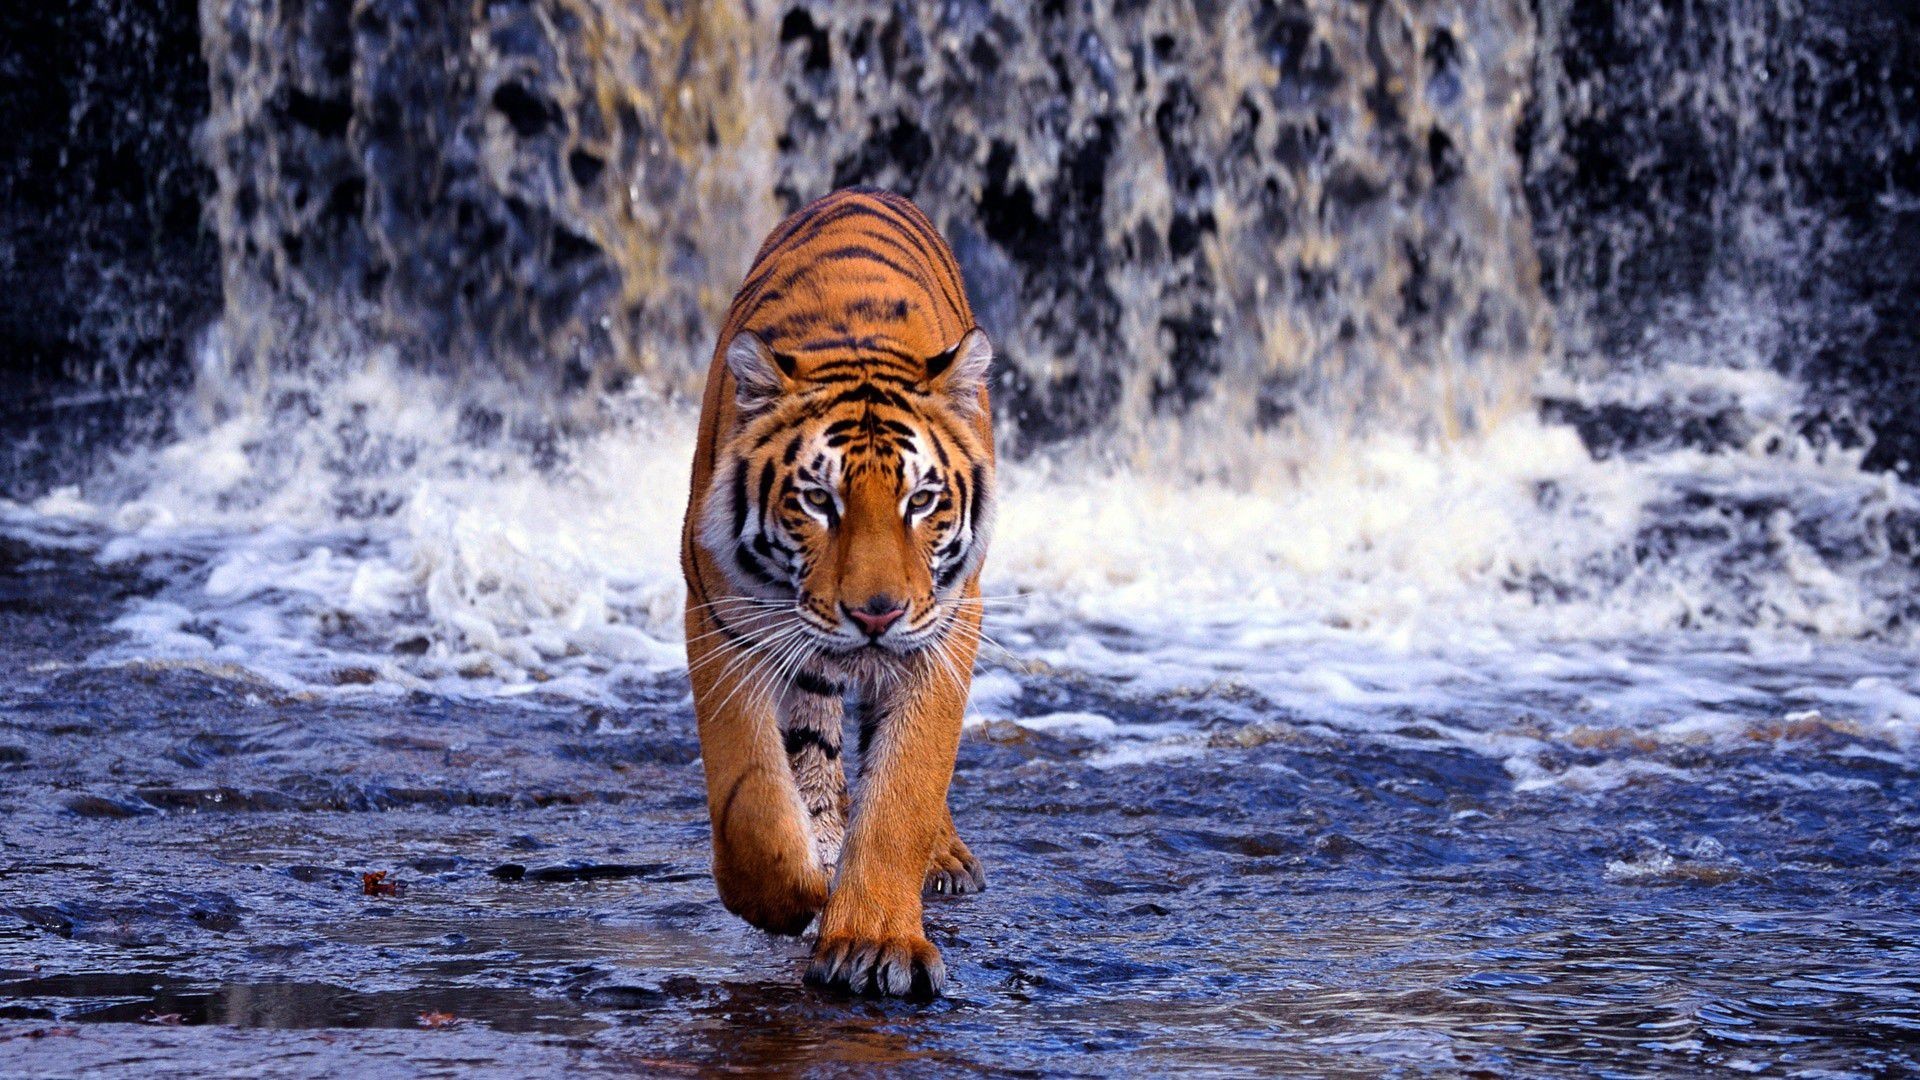 1920x1080 Cute baby tiger images wallpaper